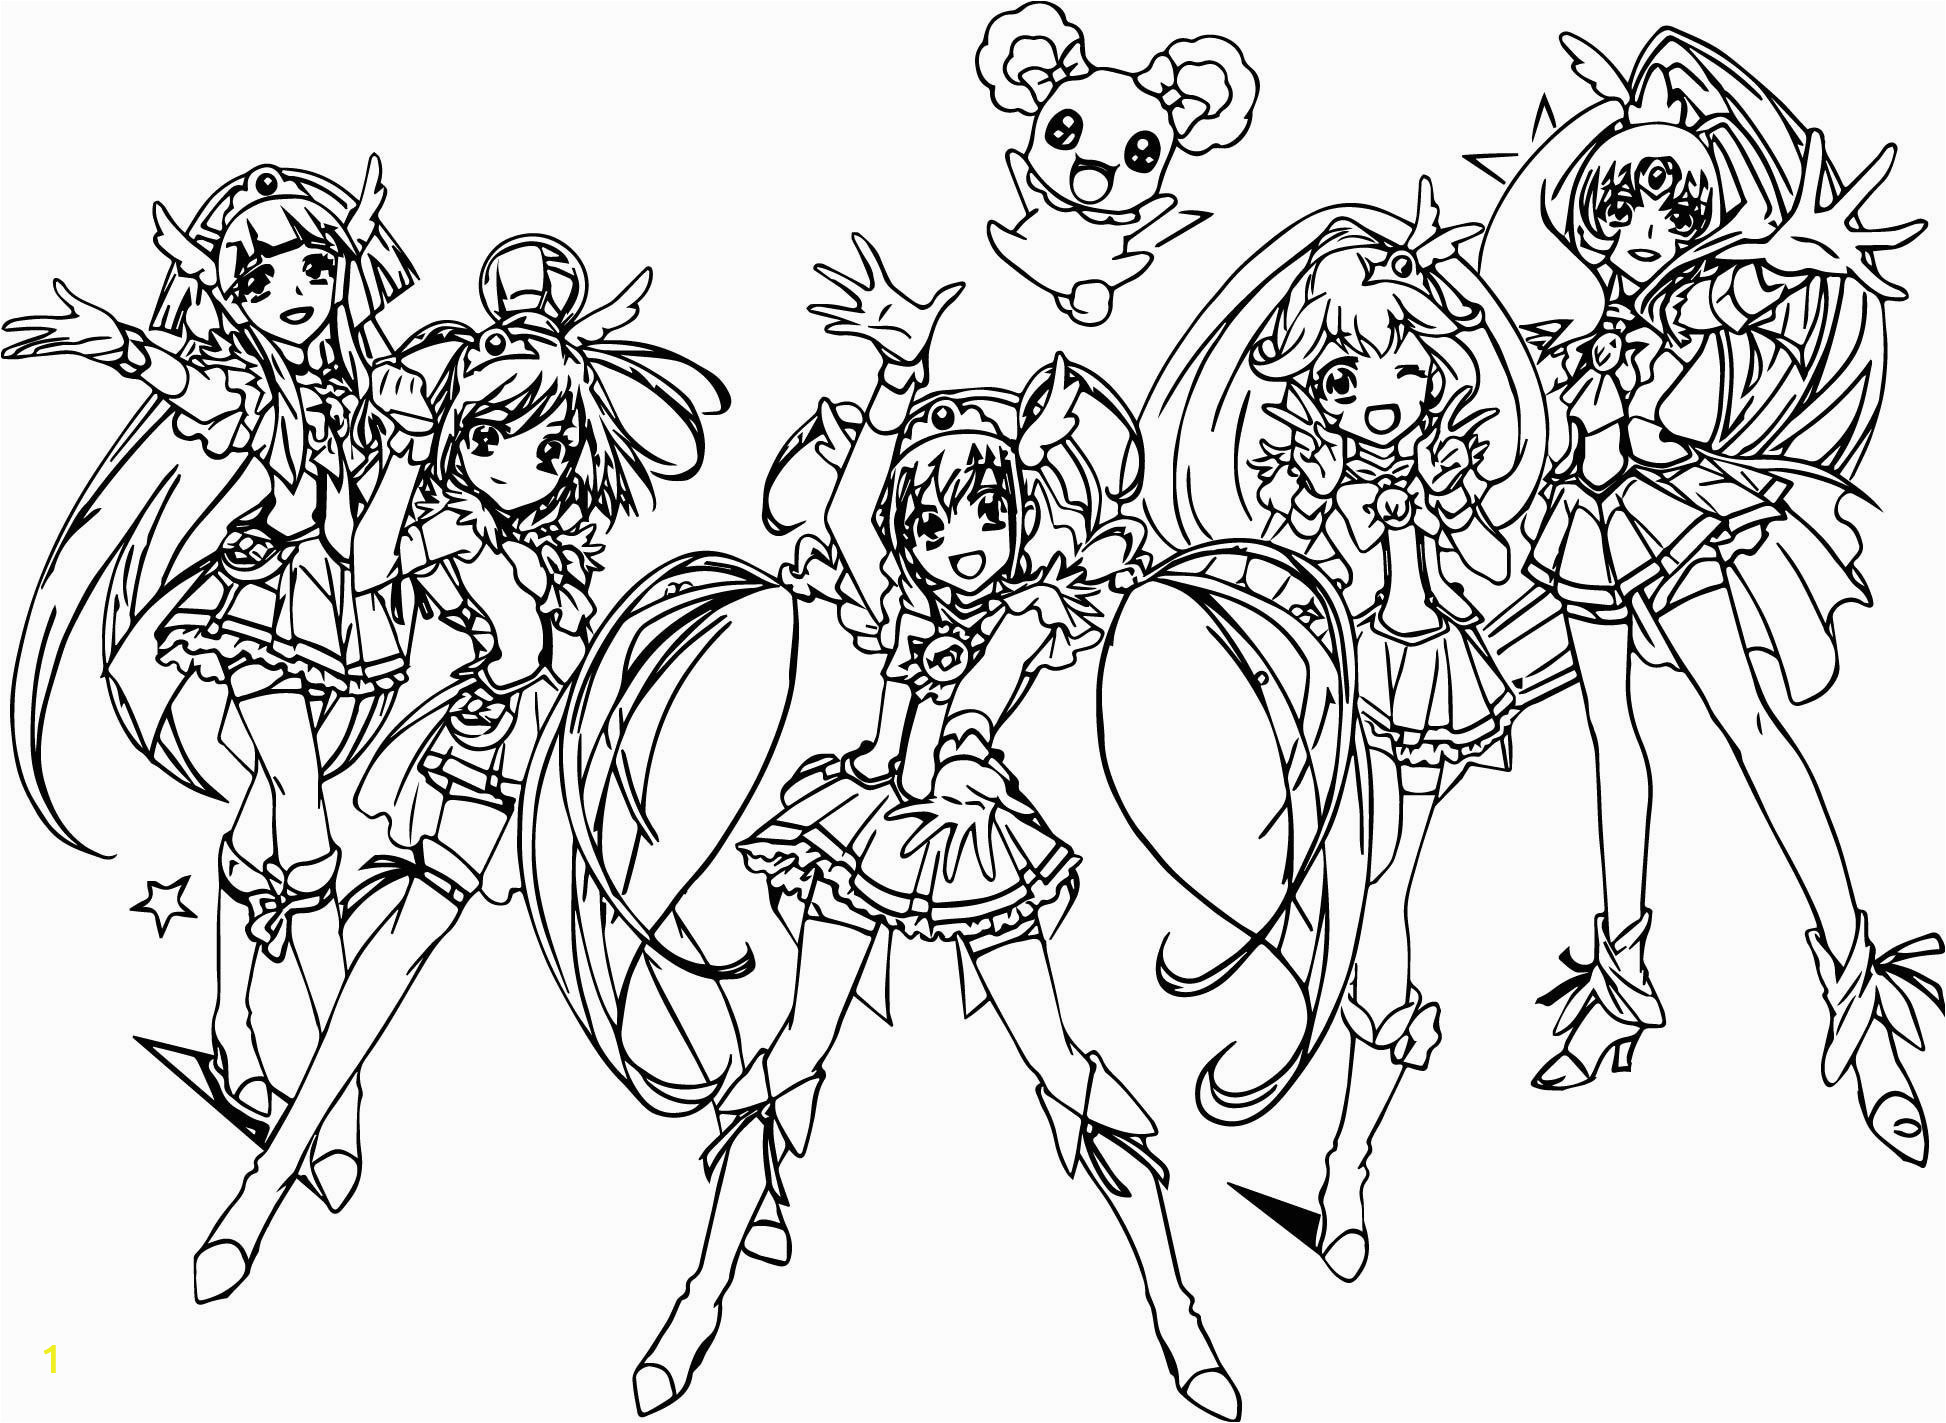 Glitter force Doki Doki Coloring Pages the Best Free Glitter Coloring Page Images Download From